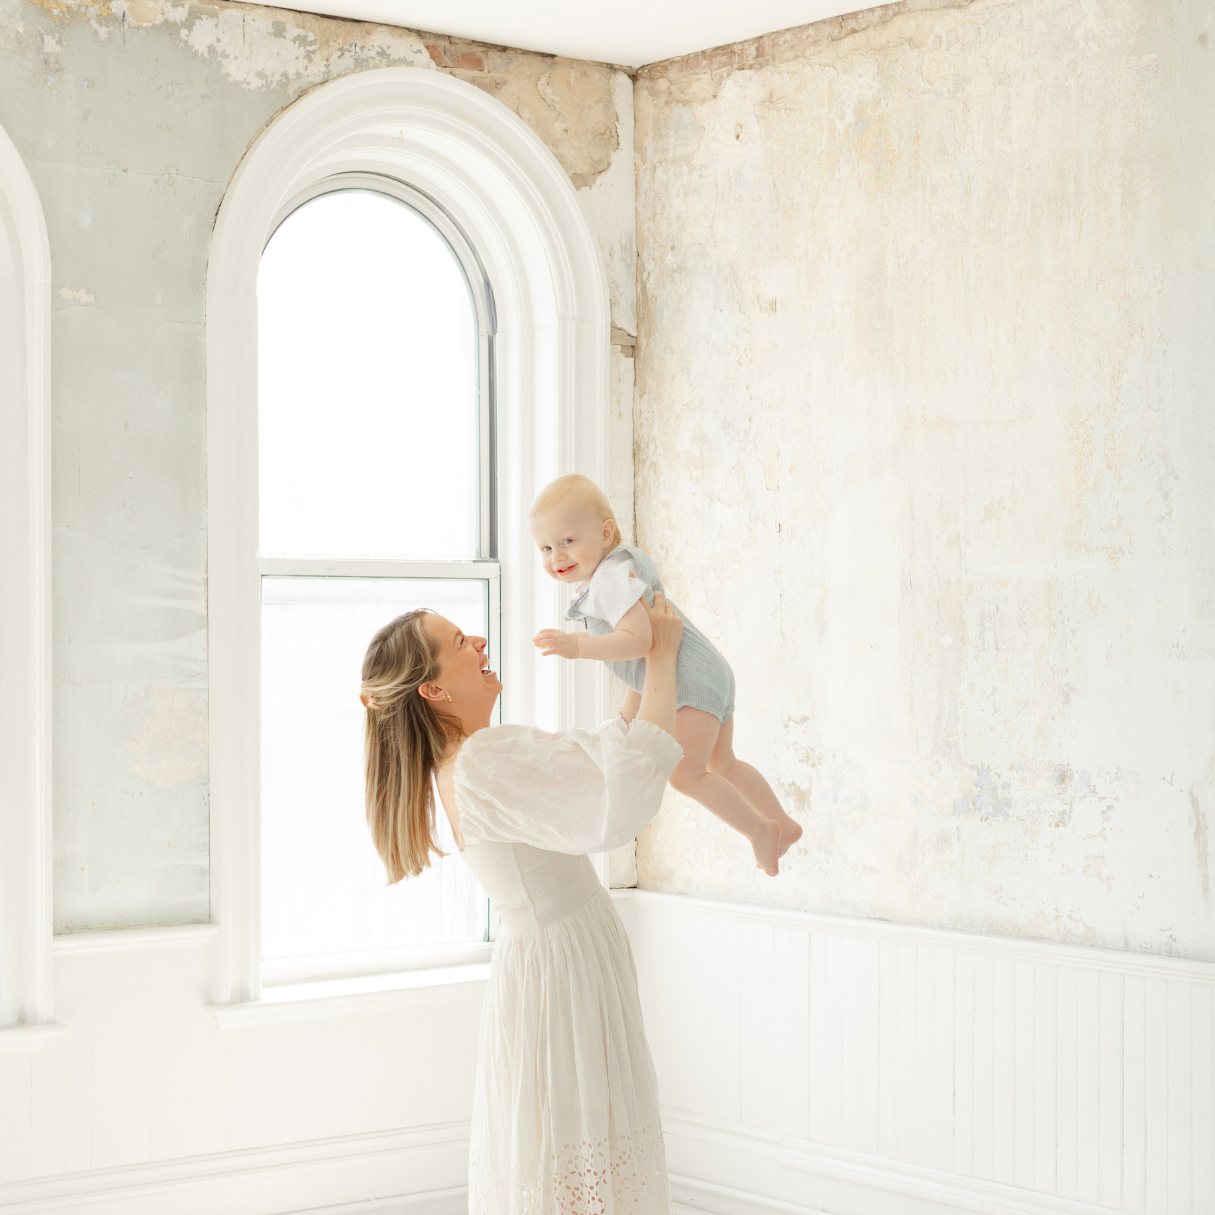 mom wearing cream colored dress lifts up baby boy during boston mini sessions event